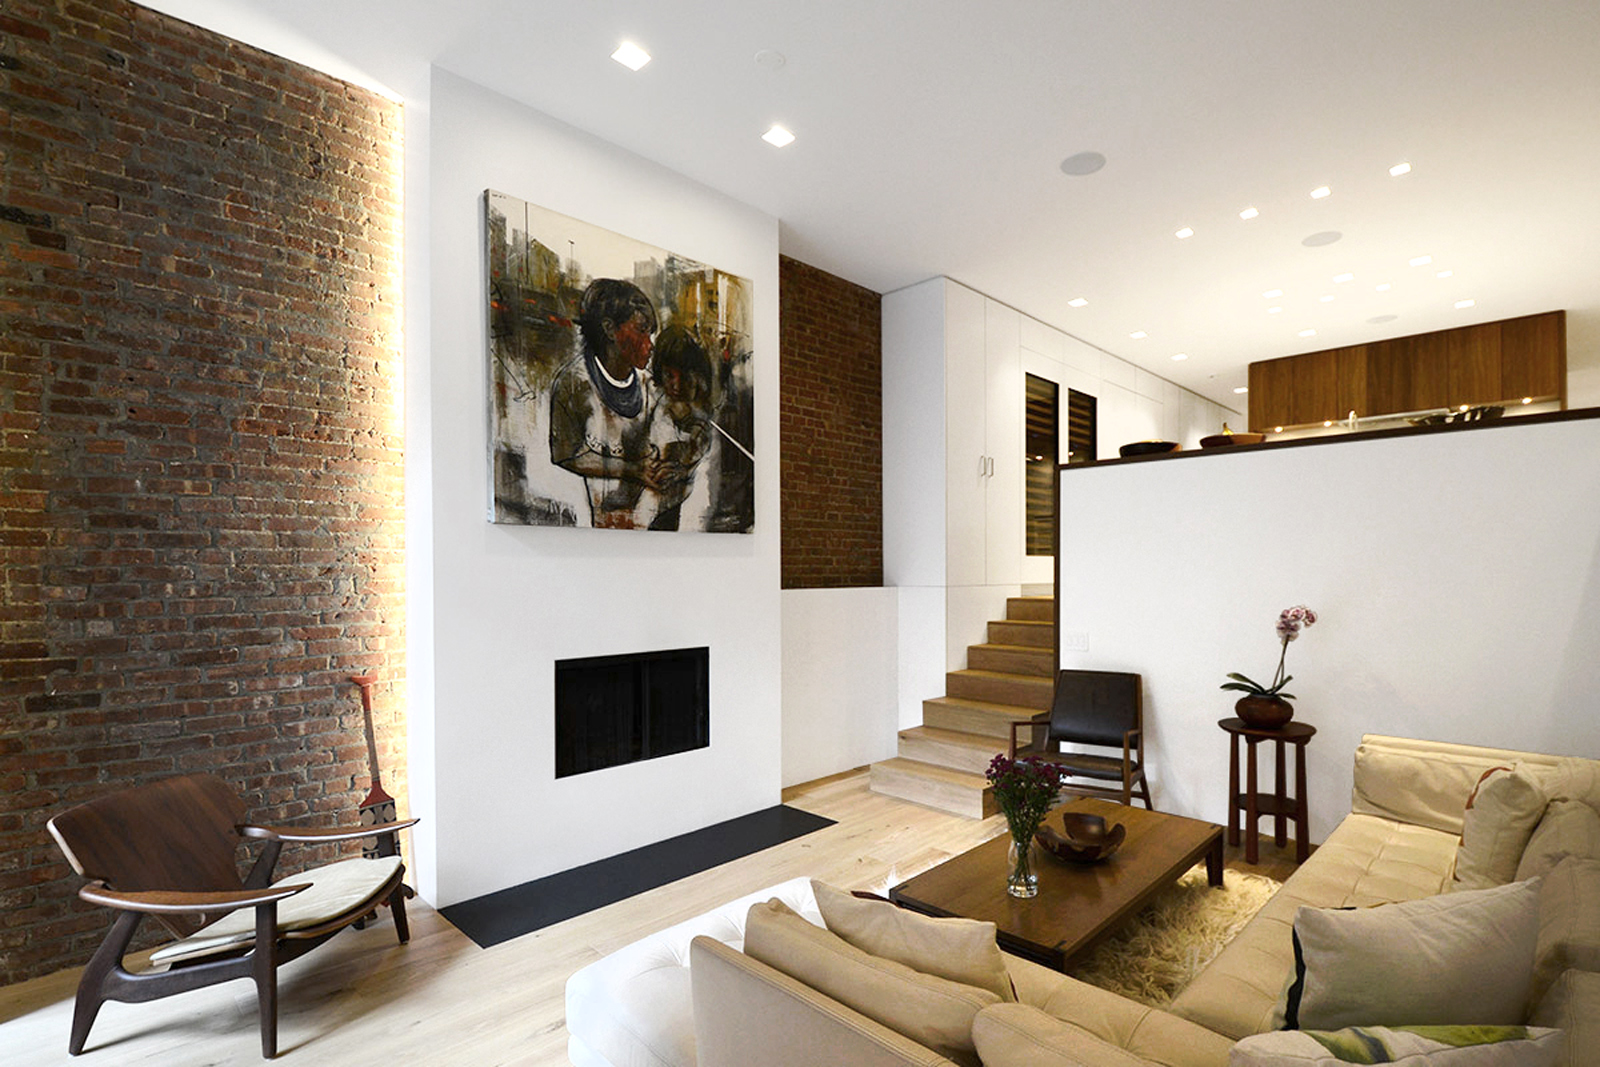 01-res4-resoltuion-4-architecture-modern-residential-brownstone-upper-west-side-townhouse-renovation-living-room.jpg